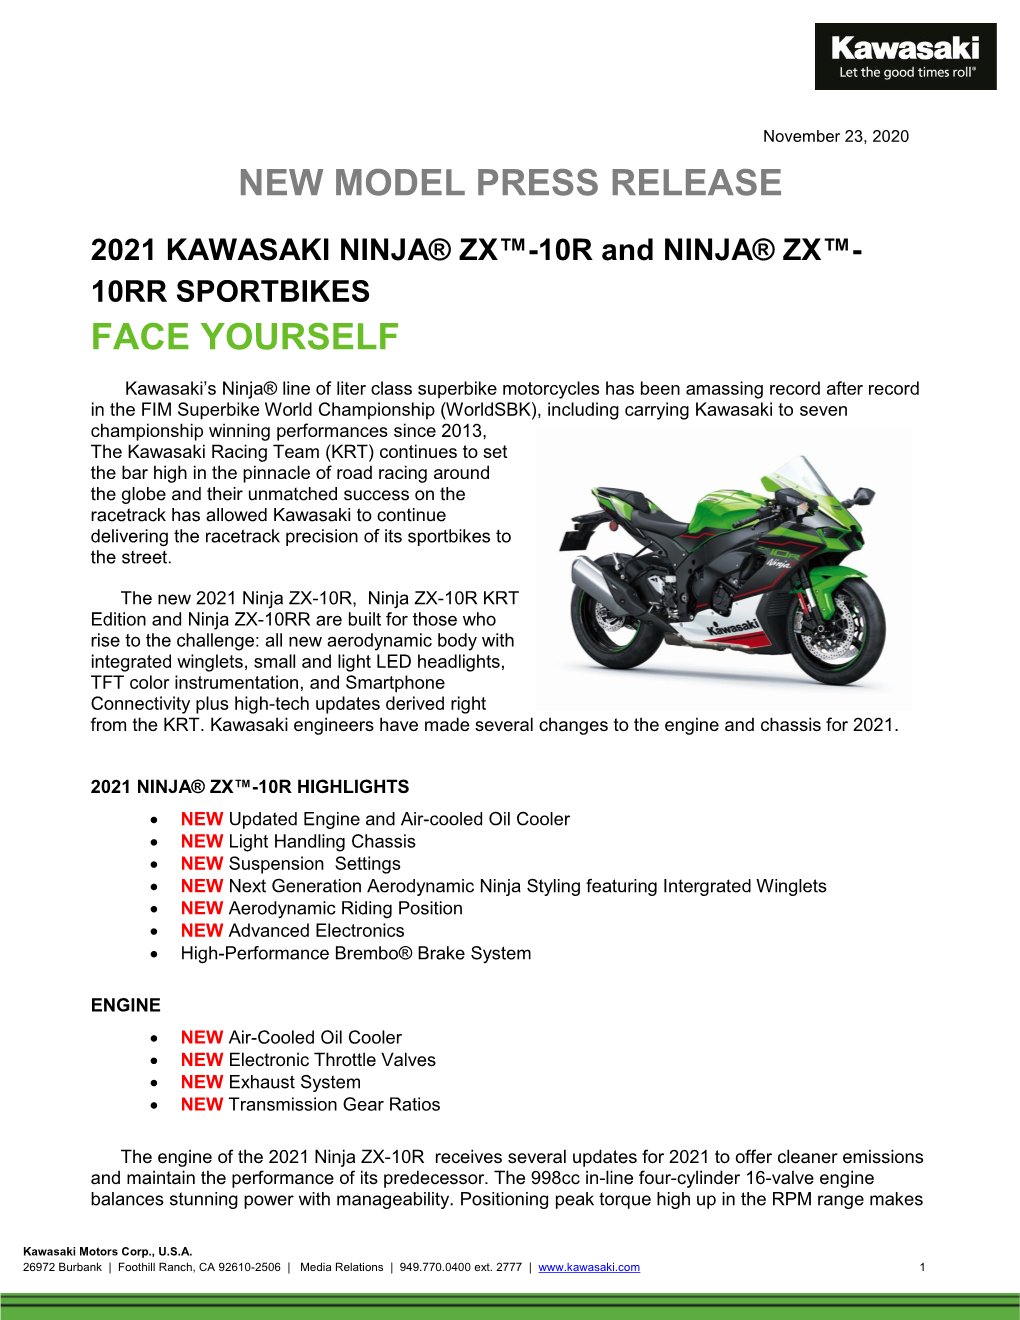 New Model Press Release Face Yourself